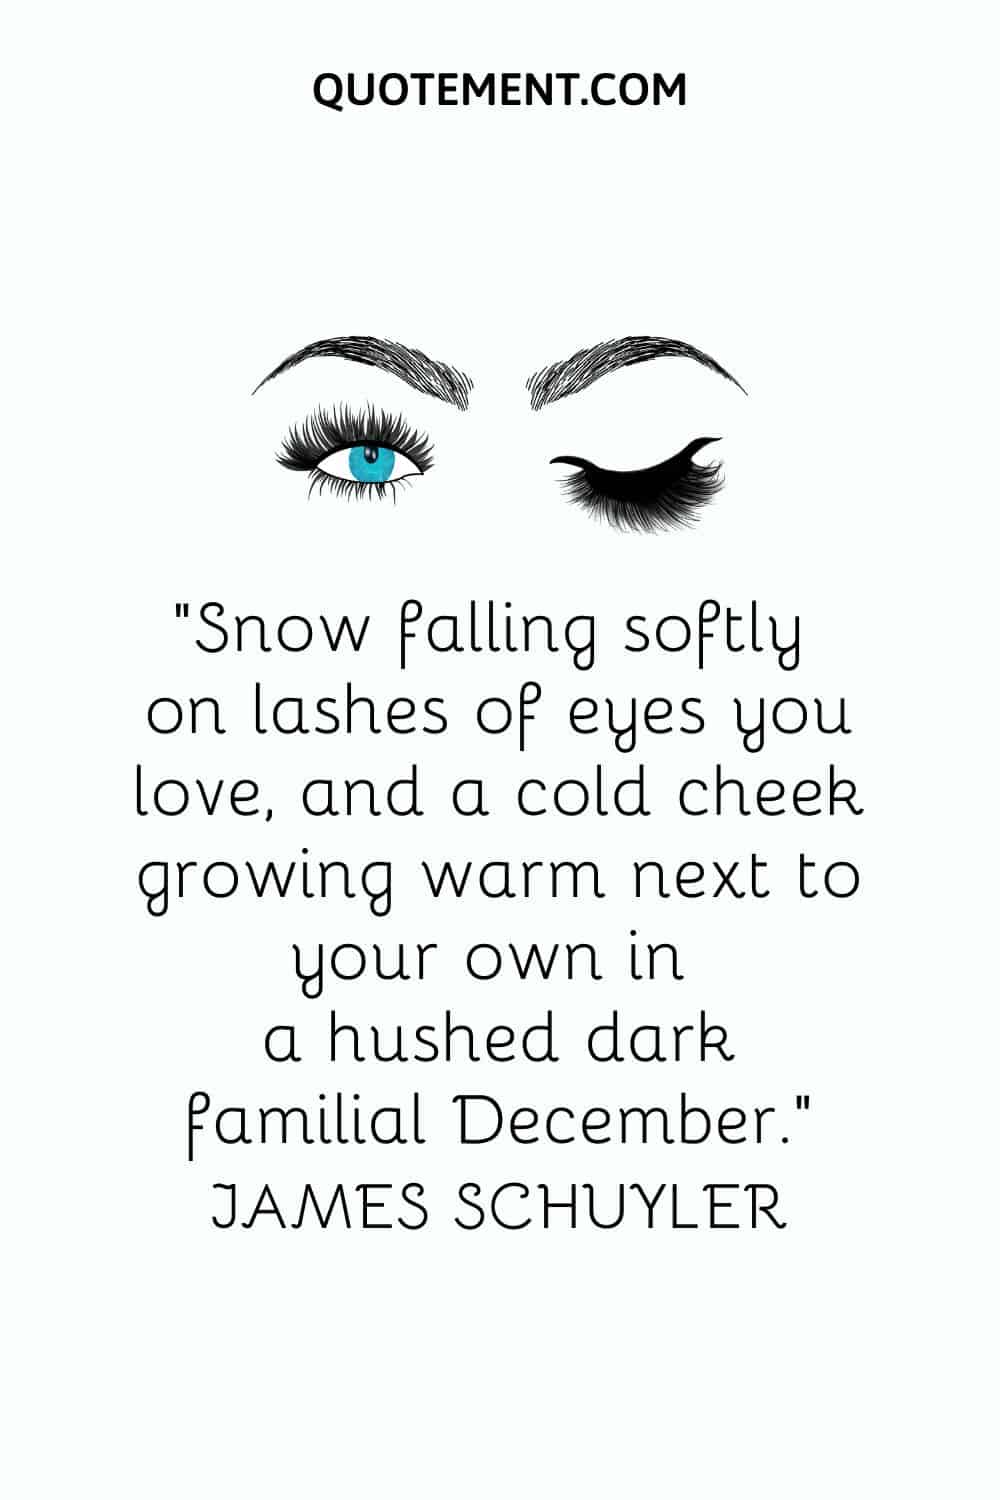 Snow falling softly on lashes of eyes you love, and a cold cheek growing warm next to your own in a hushed dark familial December.